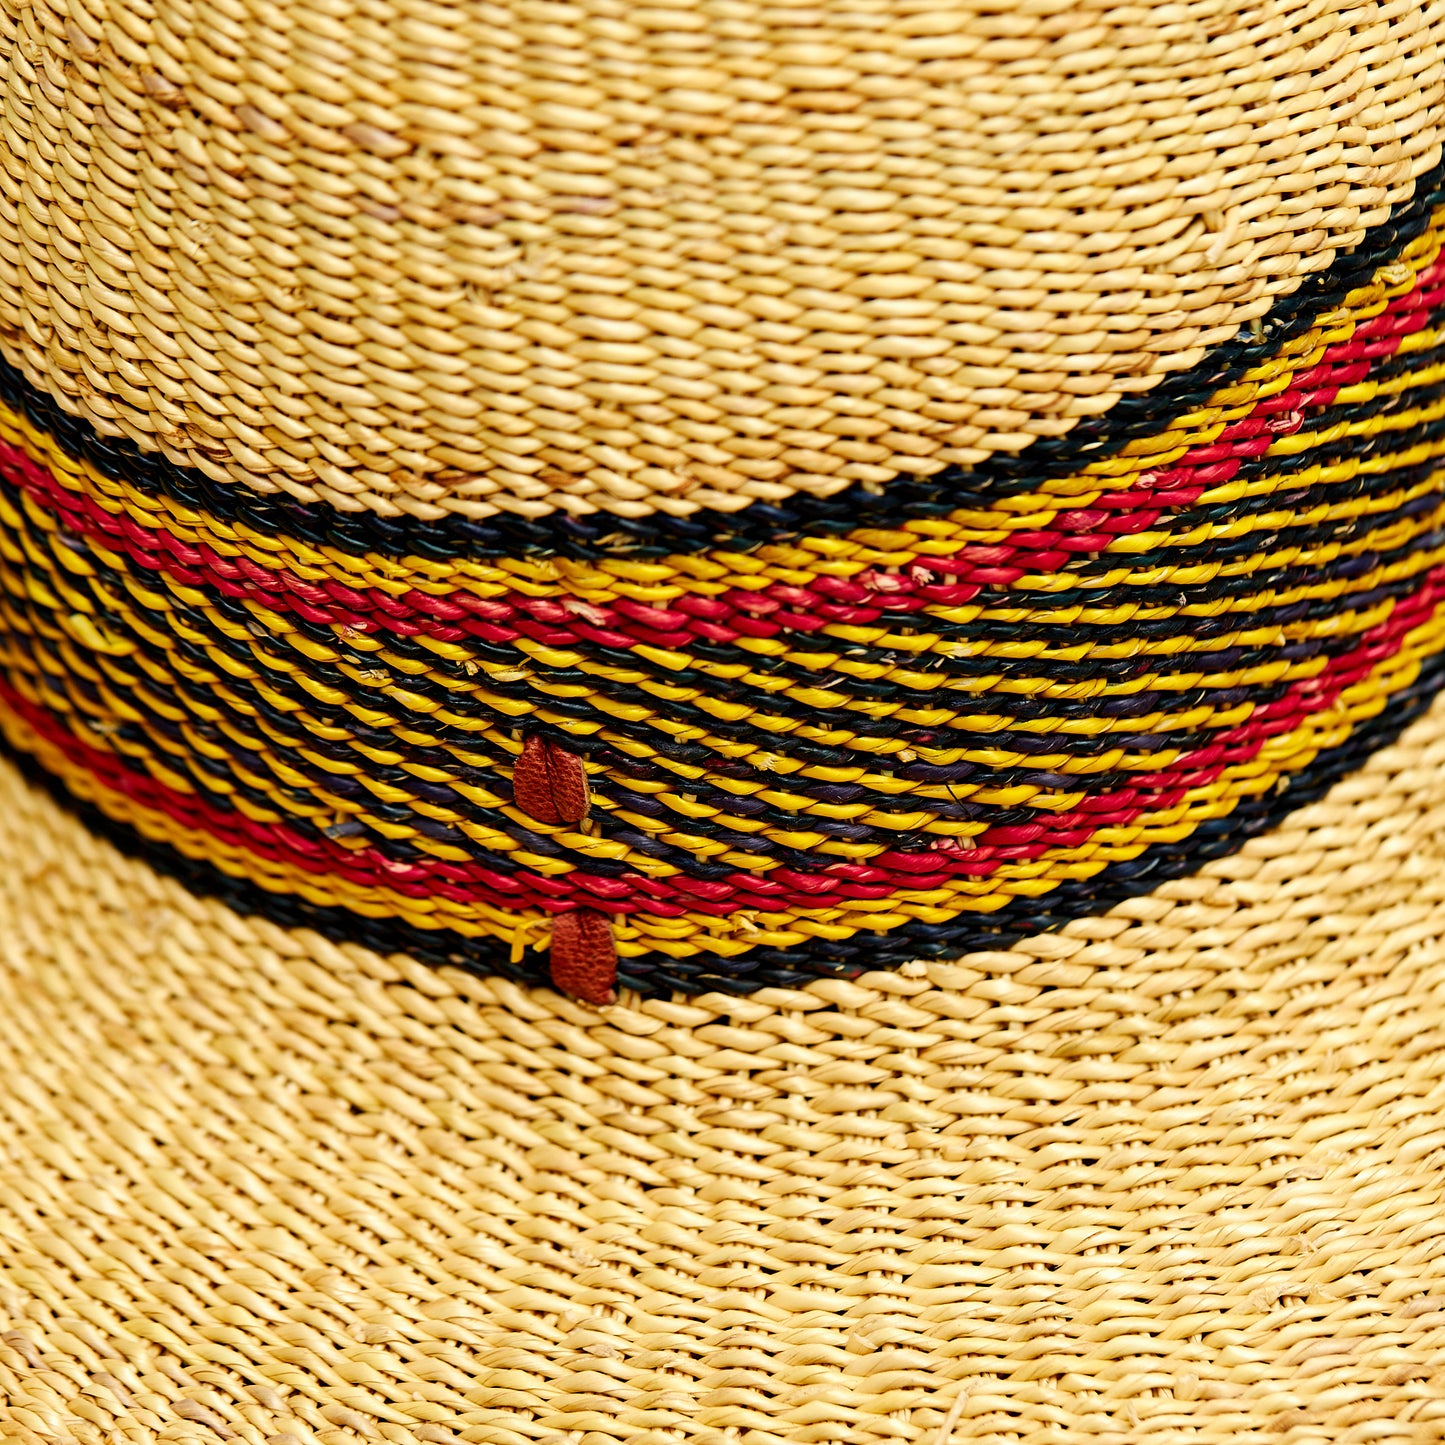 Natural Elephant Grass Handwoven Garden Hat Designed with Black, yellow and red colors,Made in the Northern part of Ghana-Bolgatanga.-Bolgatanga.